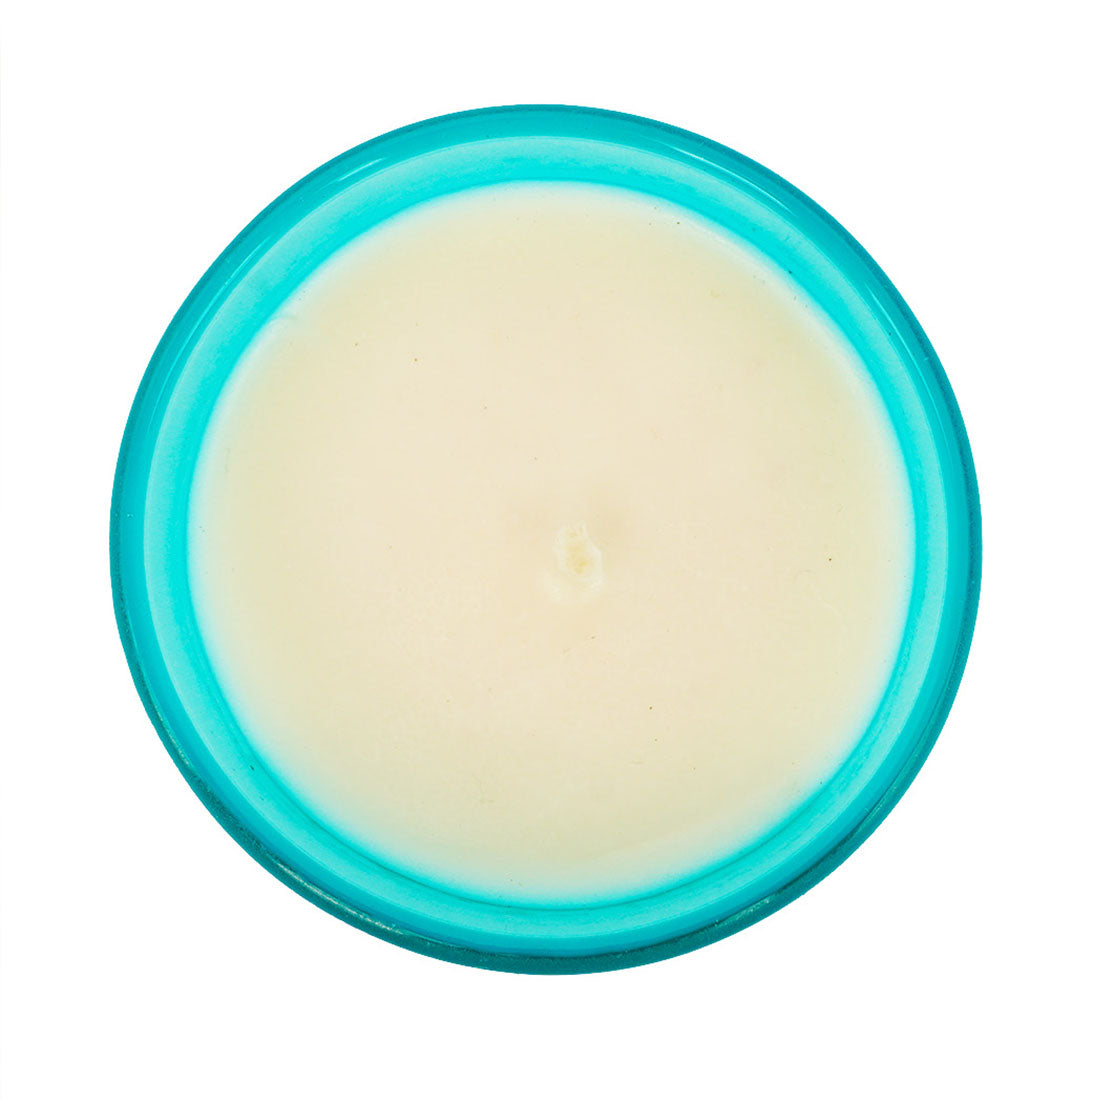 Apple, Lemon and Lily Intensely Scented Natural Soy Wax Candle for Home Decor